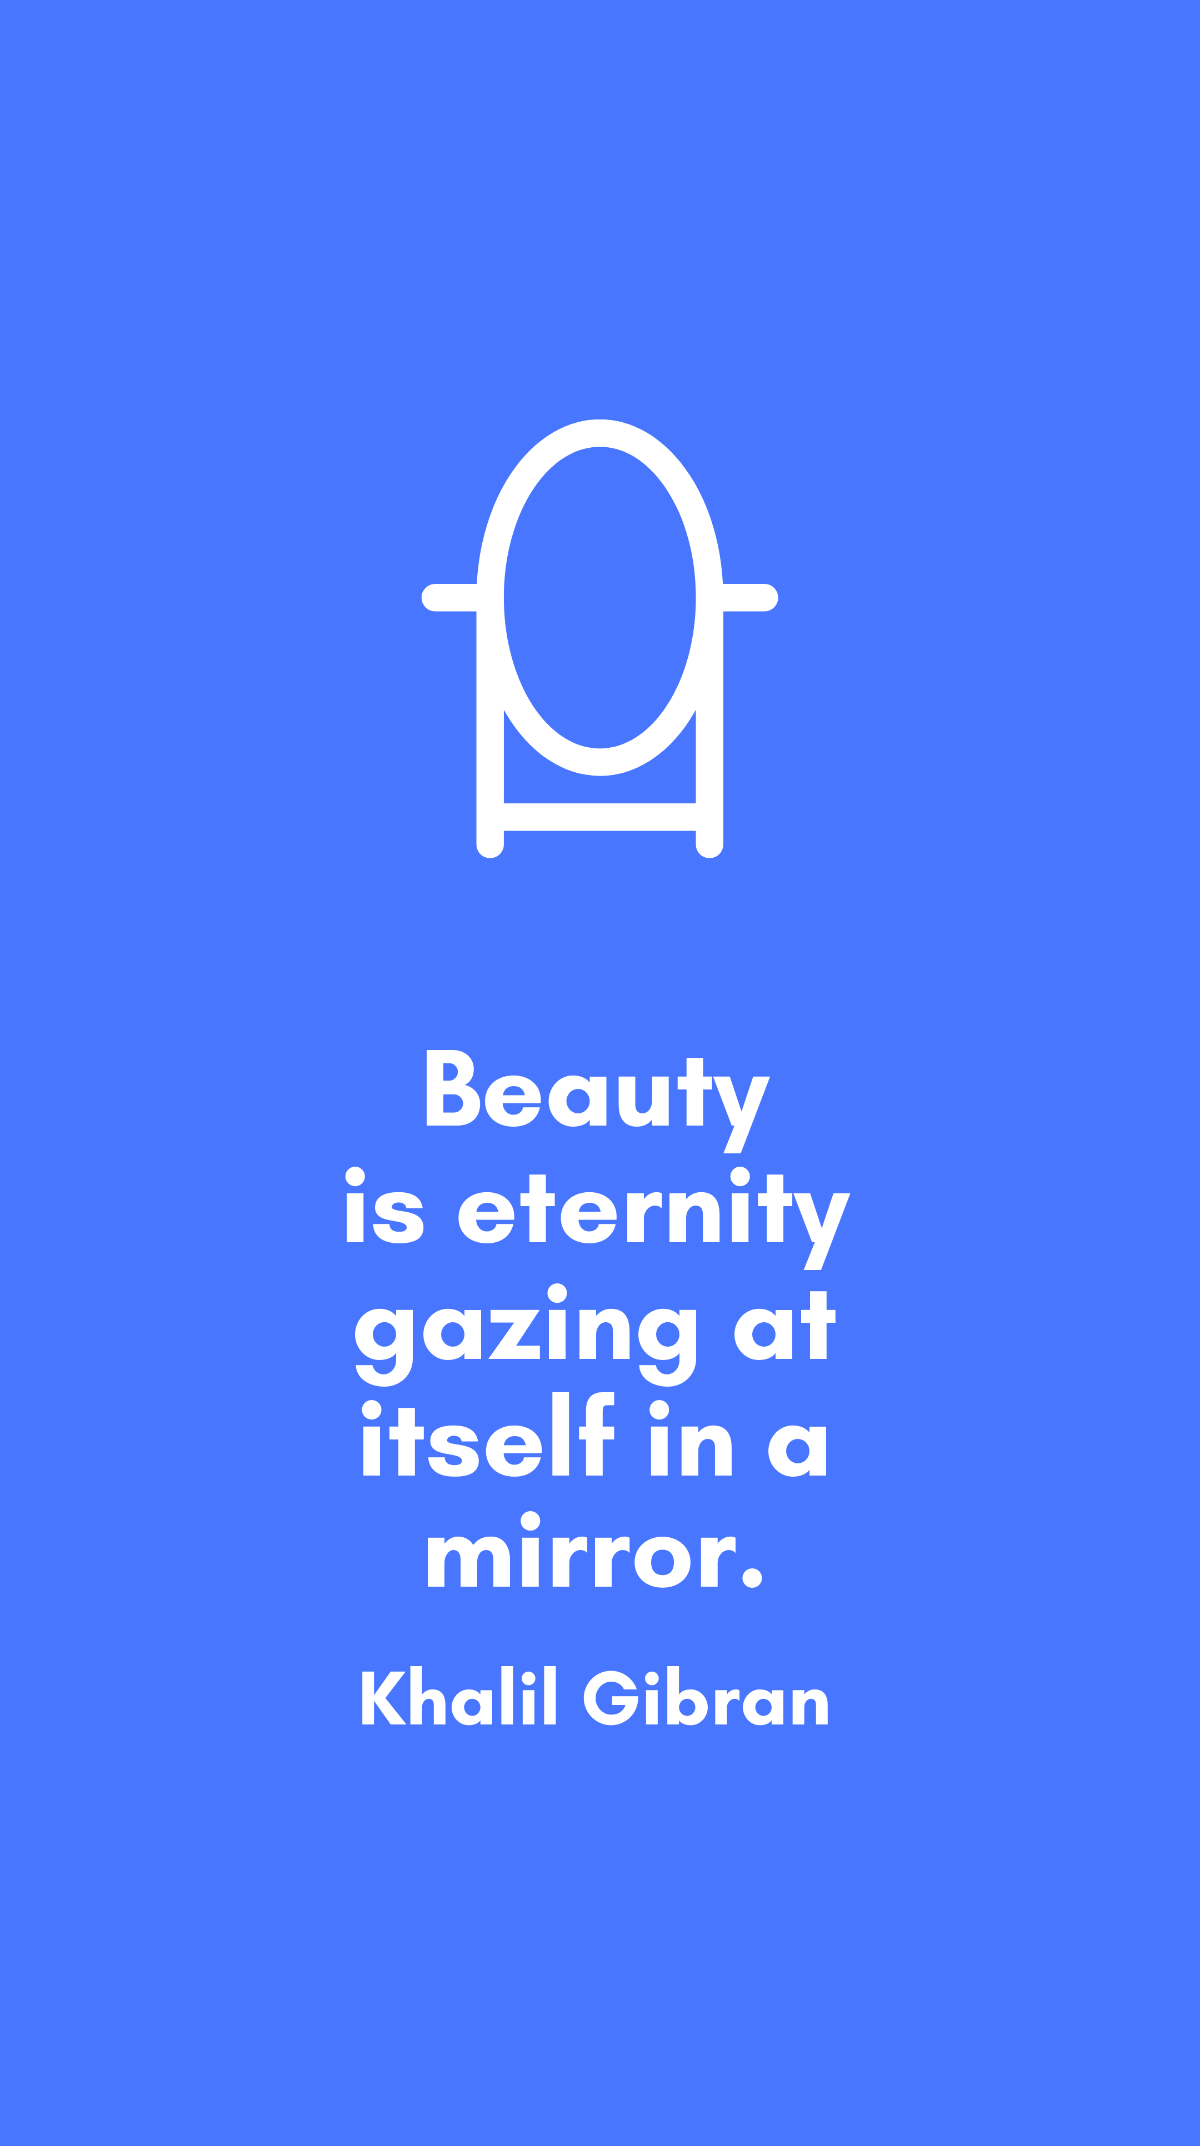 Khalil Gibran - Beauty is eternity gazing at itself in a mirror.